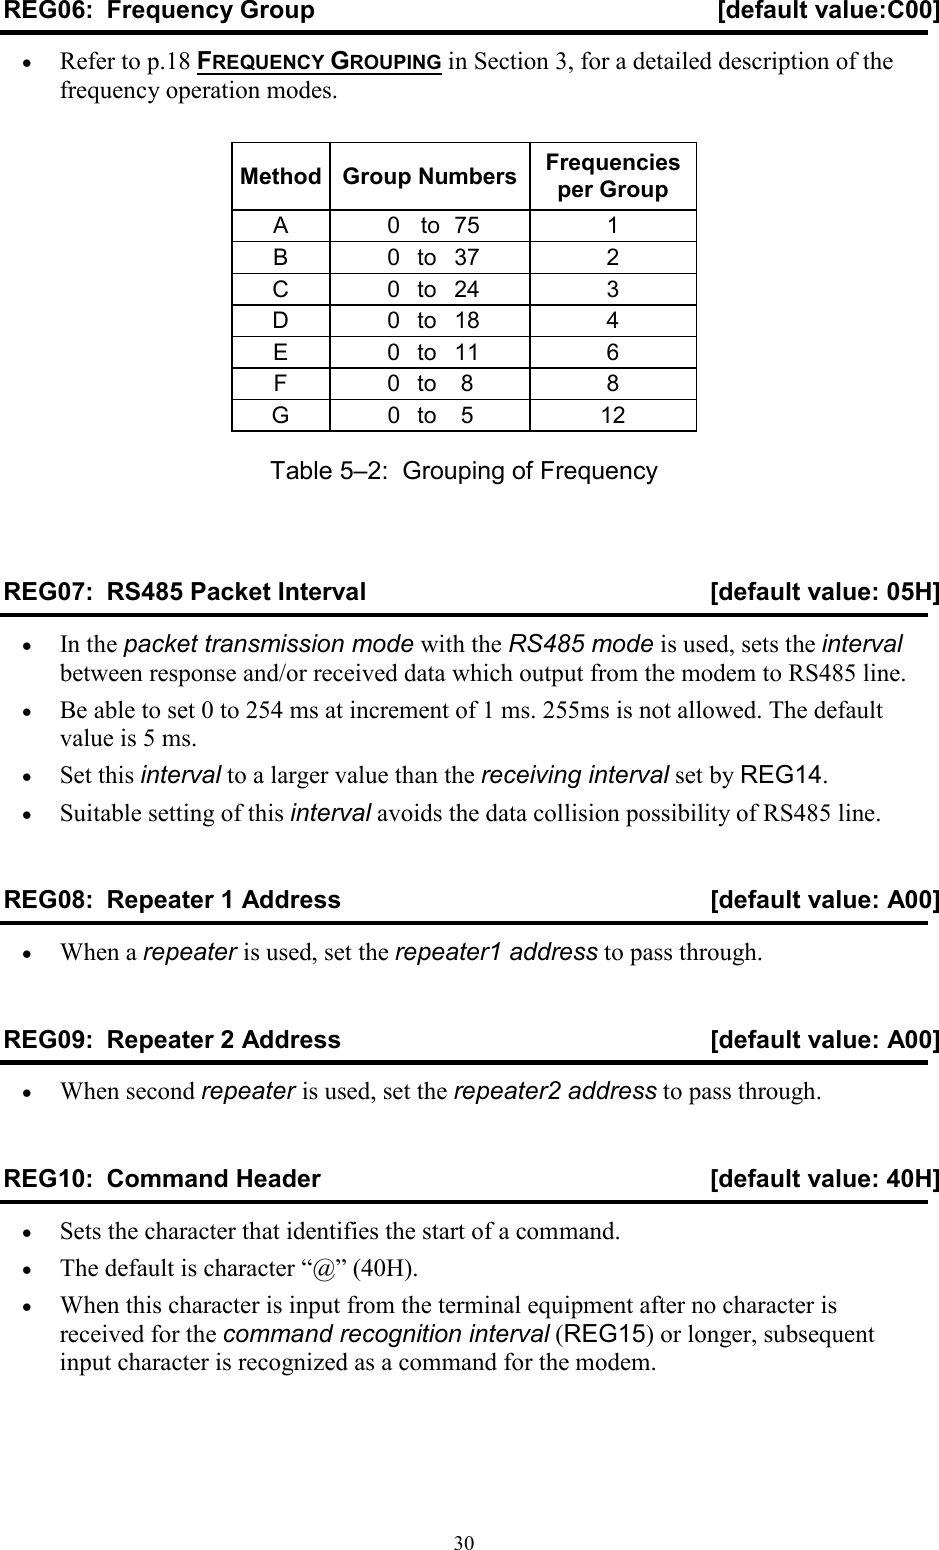   30REG06:  Frequency Group  [default value:C00] • Refer to p.18 FREQUENCY GROUPING in Section 3, for a detailed description of the frequency operation modes.  Method Group Numbers Frequencies per Group A  0  to  75   1 B  0 to 37   2 C  0 to 24   3 D  0 to 18   4 E  0 to 11   6 F  0 to 8   8 G  0 to 5   12 Table 5–2:  Grouping of Frequency REG07:  RS485 Packet Interval  [default value: 05H] • In the packet transmission mode with the RS485 mode is used, sets the interval between response and/or received data which output from the modem to RS485 line.  • Be able to set 0 to 254 ms at increment of 1 ms. 255ms is not allowed. The default value is 5 ms. • Set this interval to a larger value than the receiving interval set by REG14.   • Suitable setting of this interval avoids the data collision possibility of RS485 line.  REG08:  Repeater 1 Address  [default value: A00] • When a repeater is used, set the repeater1 address to pass through. REG09:  Repeater 2 Address  [default value: A00] • When second repeater is used, set the repeater2 address to pass through. REG10:  Command Header  [default value: 40H] • Sets the character that identifies the start of a command. • The default is character “@” (40H). • When this character is input from the terminal equipment after no character is received for the command recognition interval (REG15) or longer, subsequent input character is recognized as a command for the modem. 